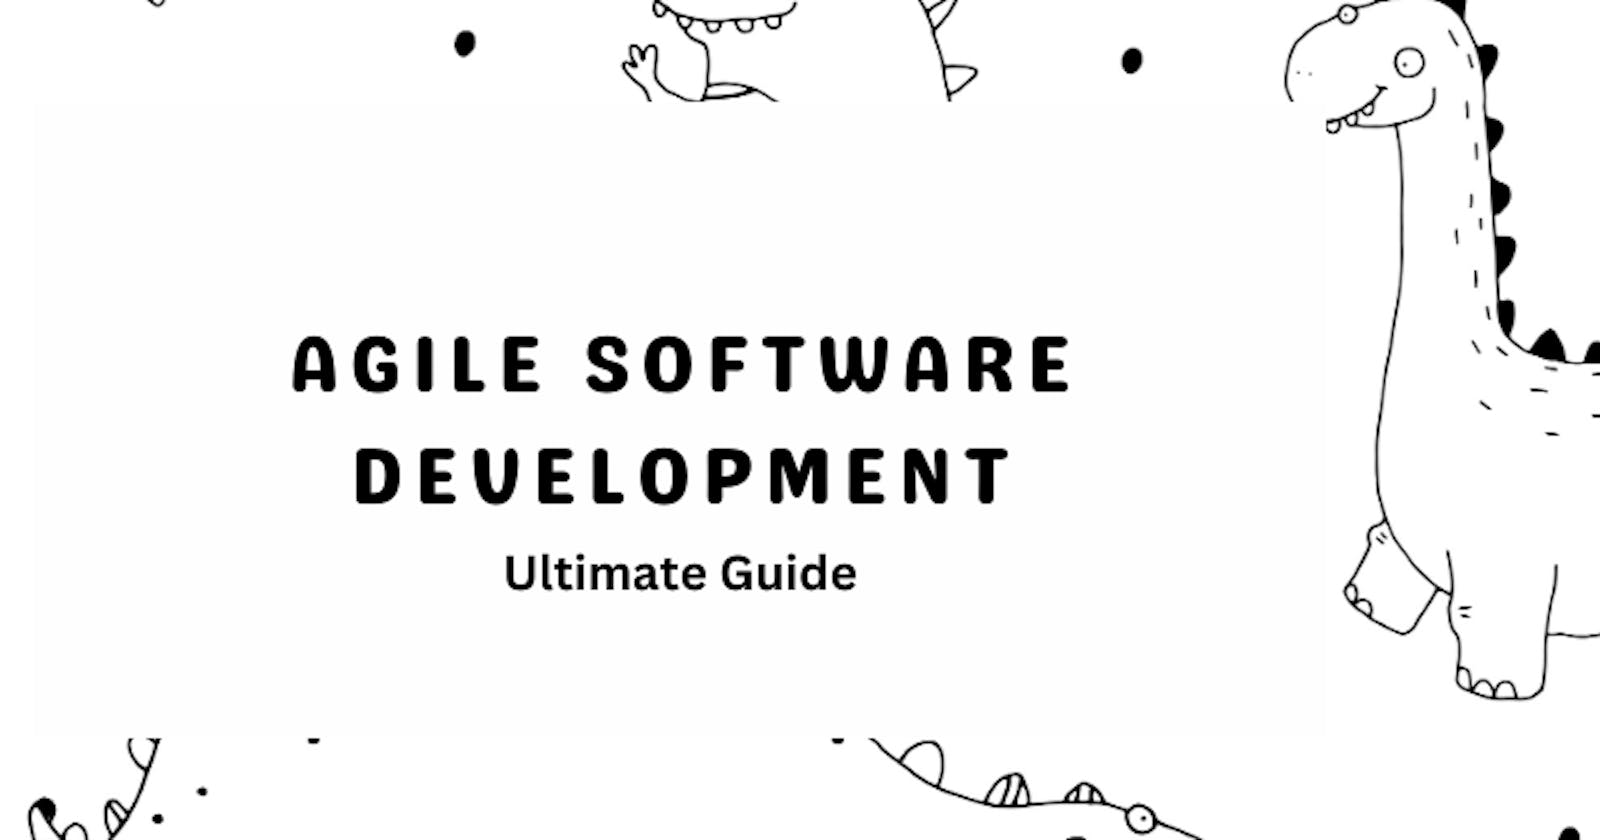 The Ultimate Guide to Agile Software Development